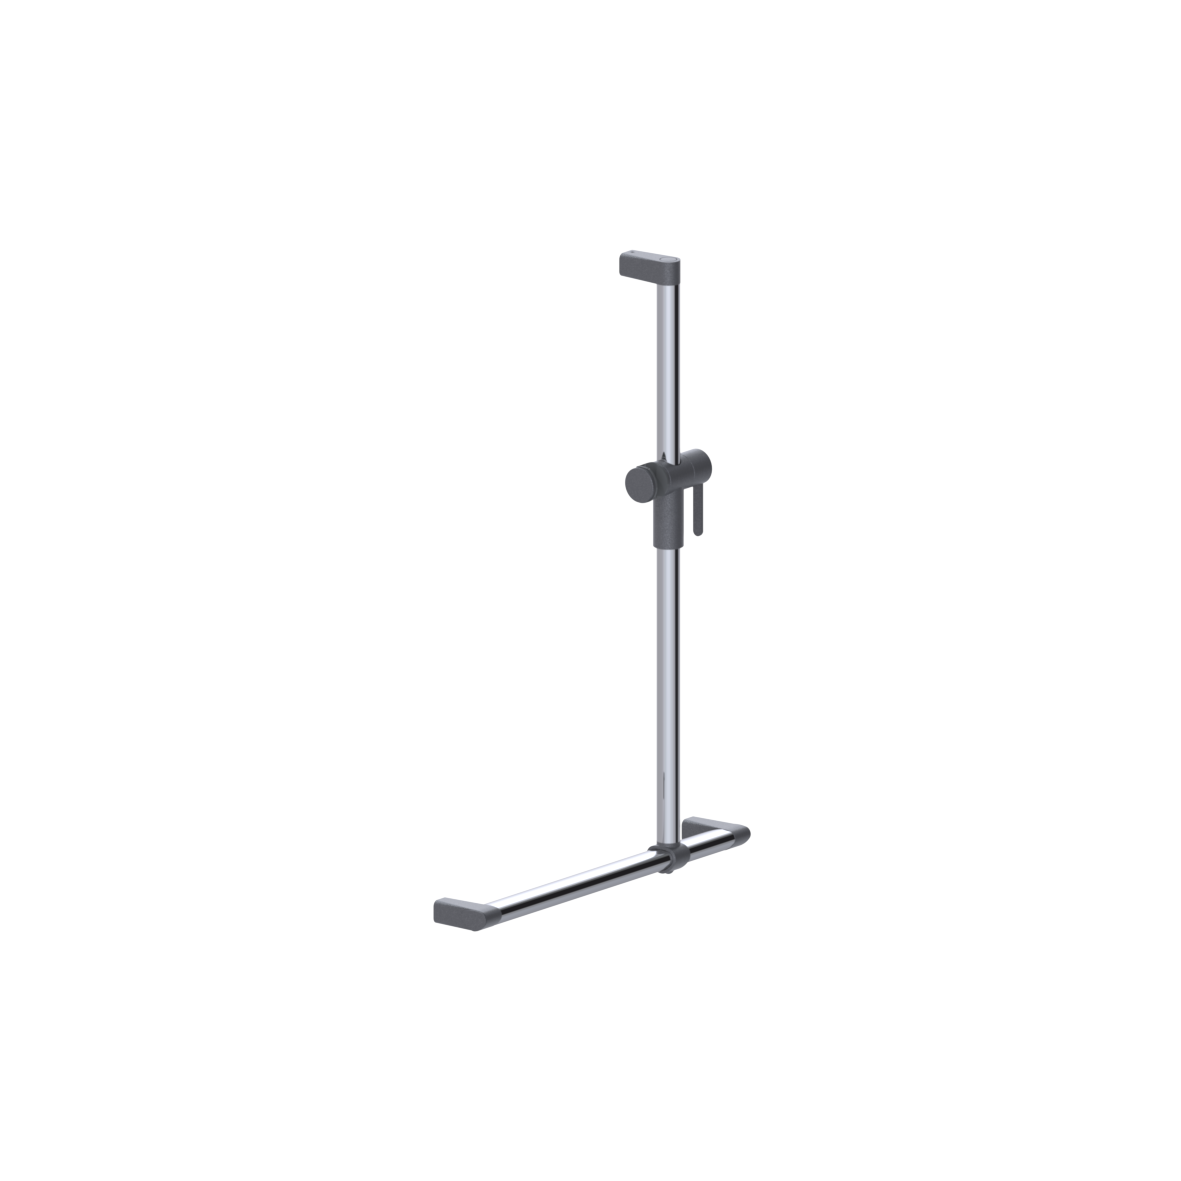 Cavere Care Chrome Shower handrail, with movable shower handrail, left and right, 500 x 750 mm, single-point mounting, Chrome metallic anthracite